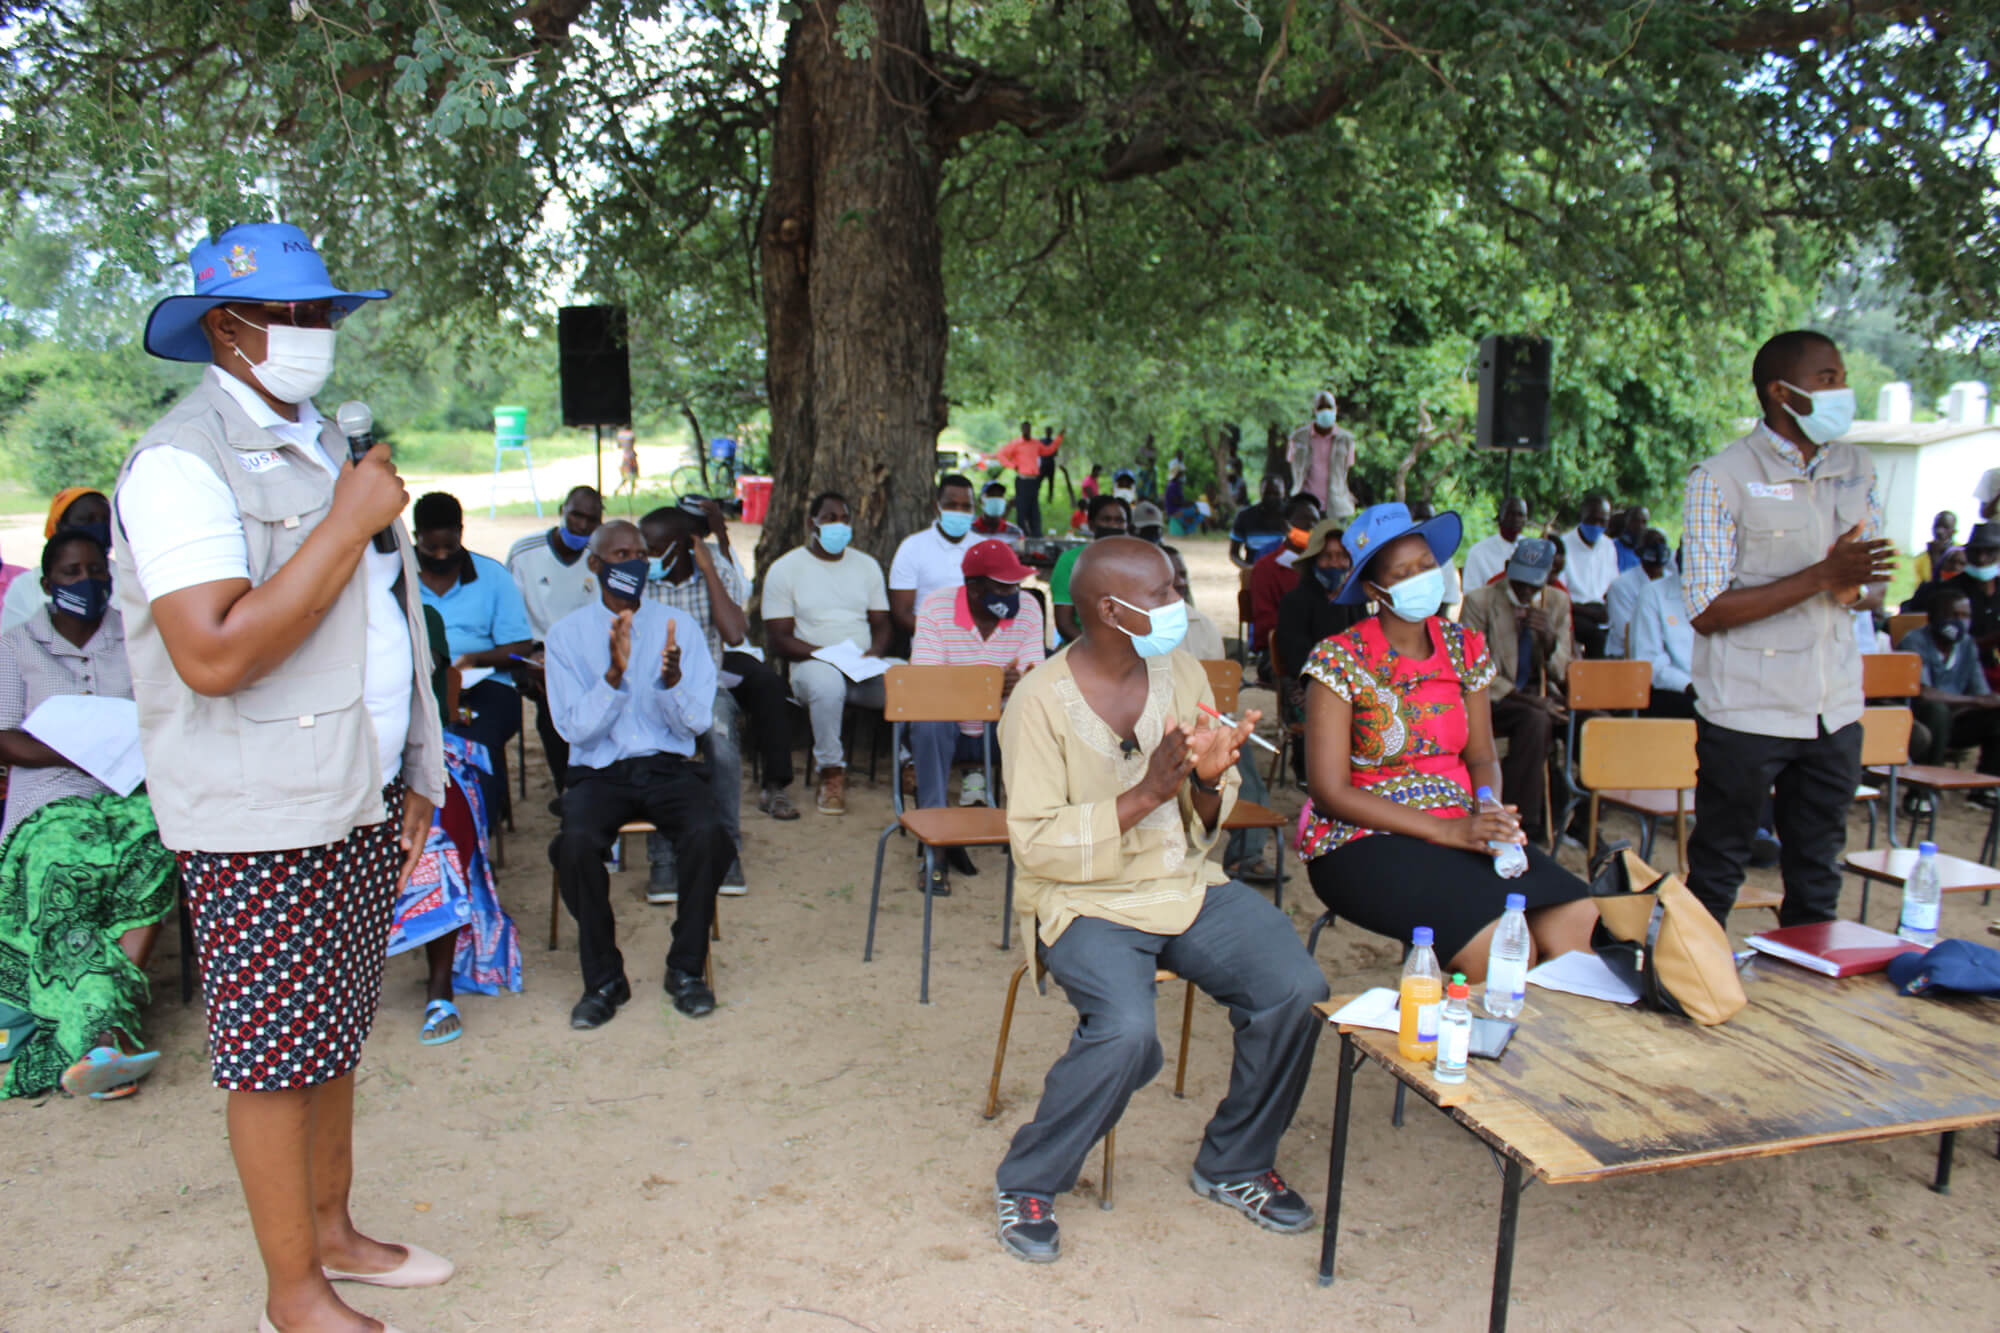 International Medical Corps staff and stakeholders watch the World Water Day events.